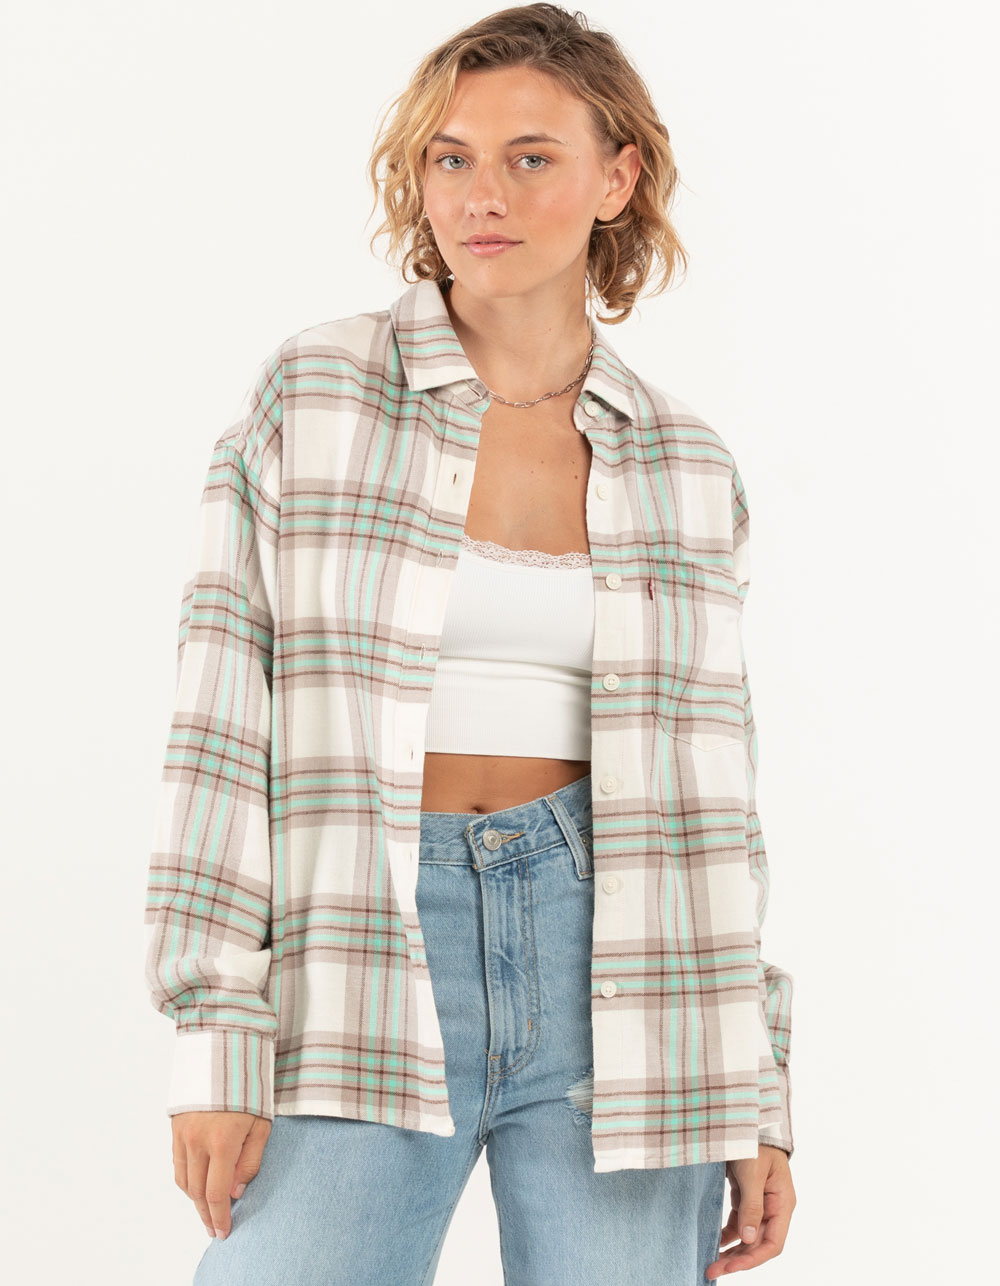 LEVI'S Davy Womens Flannel - GREEN COMBO | Tillys